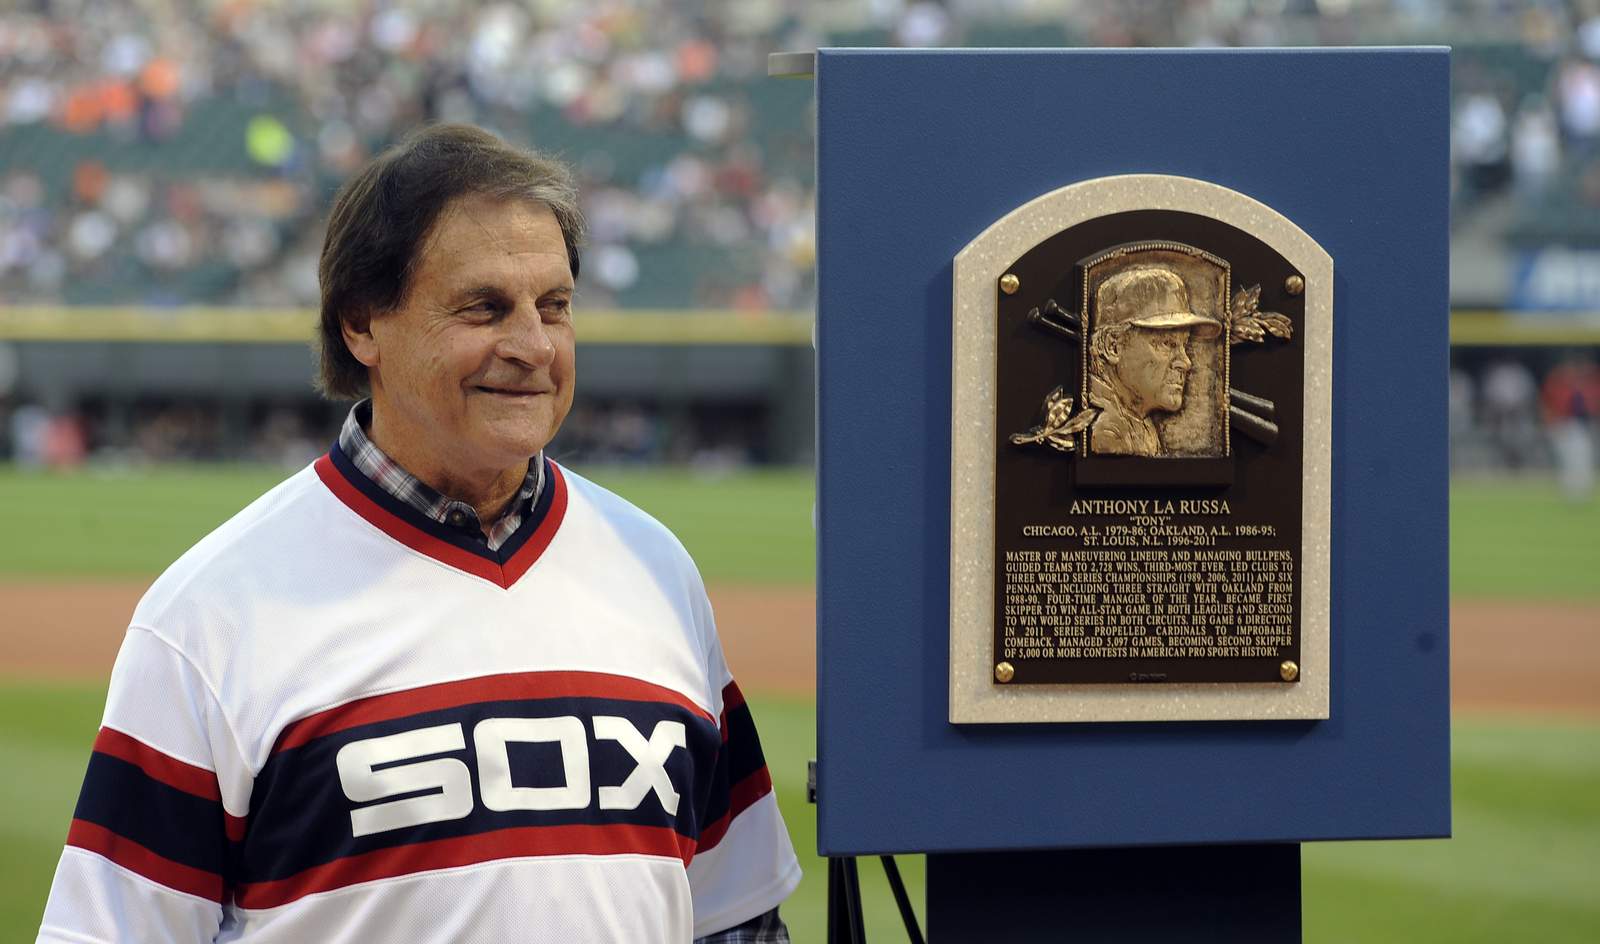 White Sox Manager Tony La Russa Out Indefinitely Due to Medical